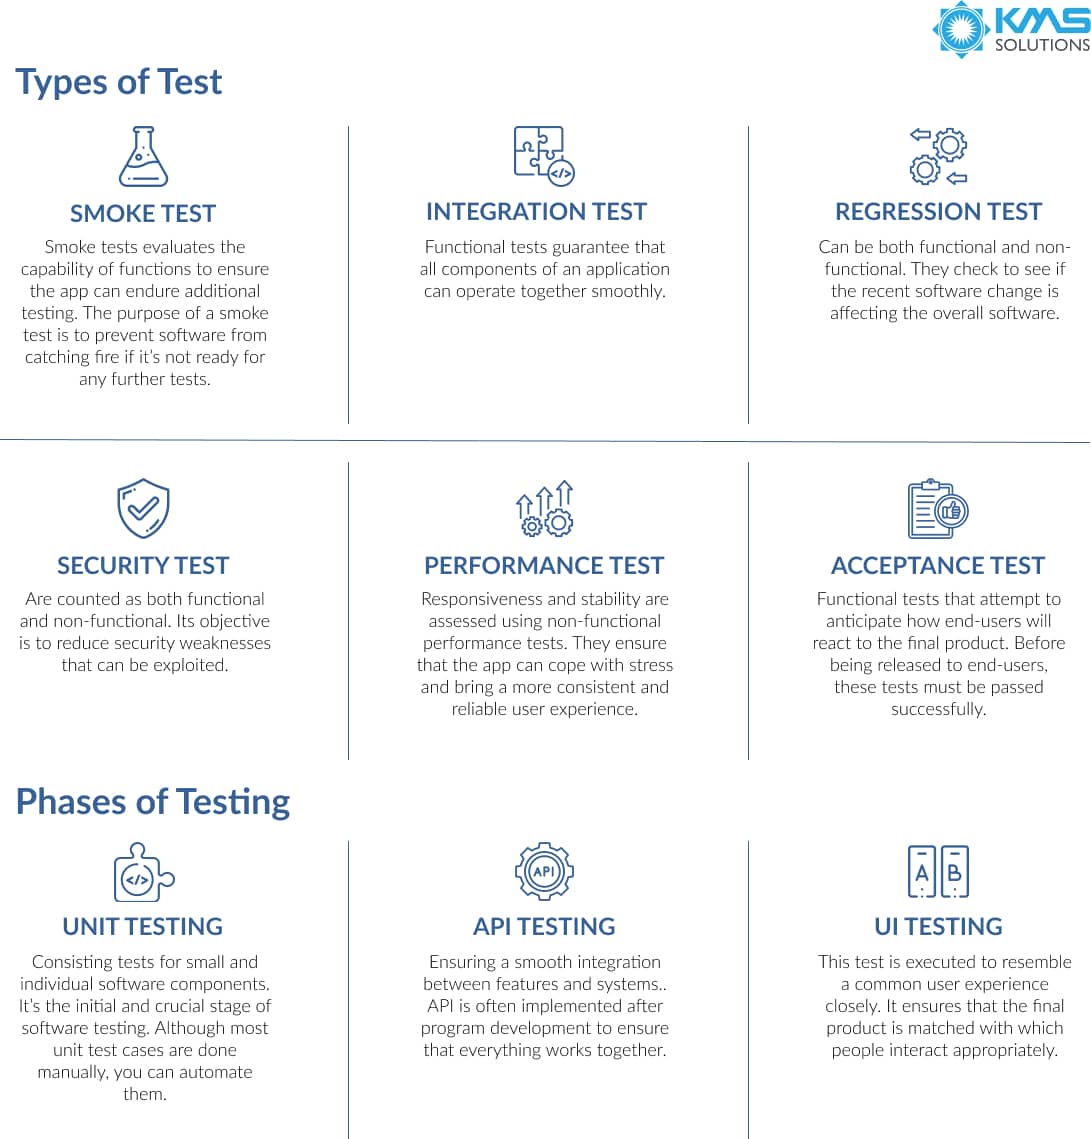 types of automation testing